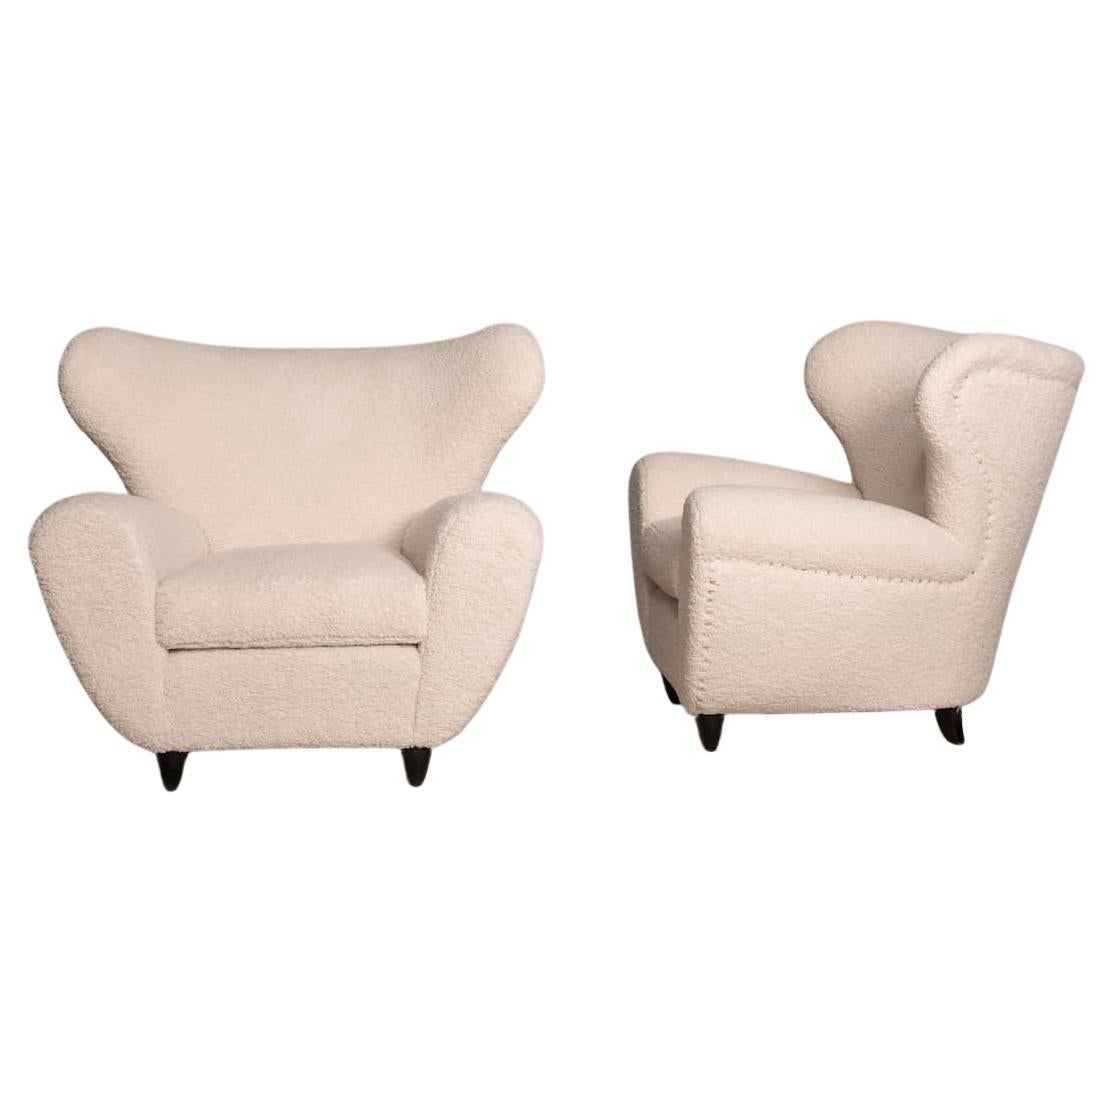 1950s Pair of Armchairs Attributed to Guglielmo Ulrich